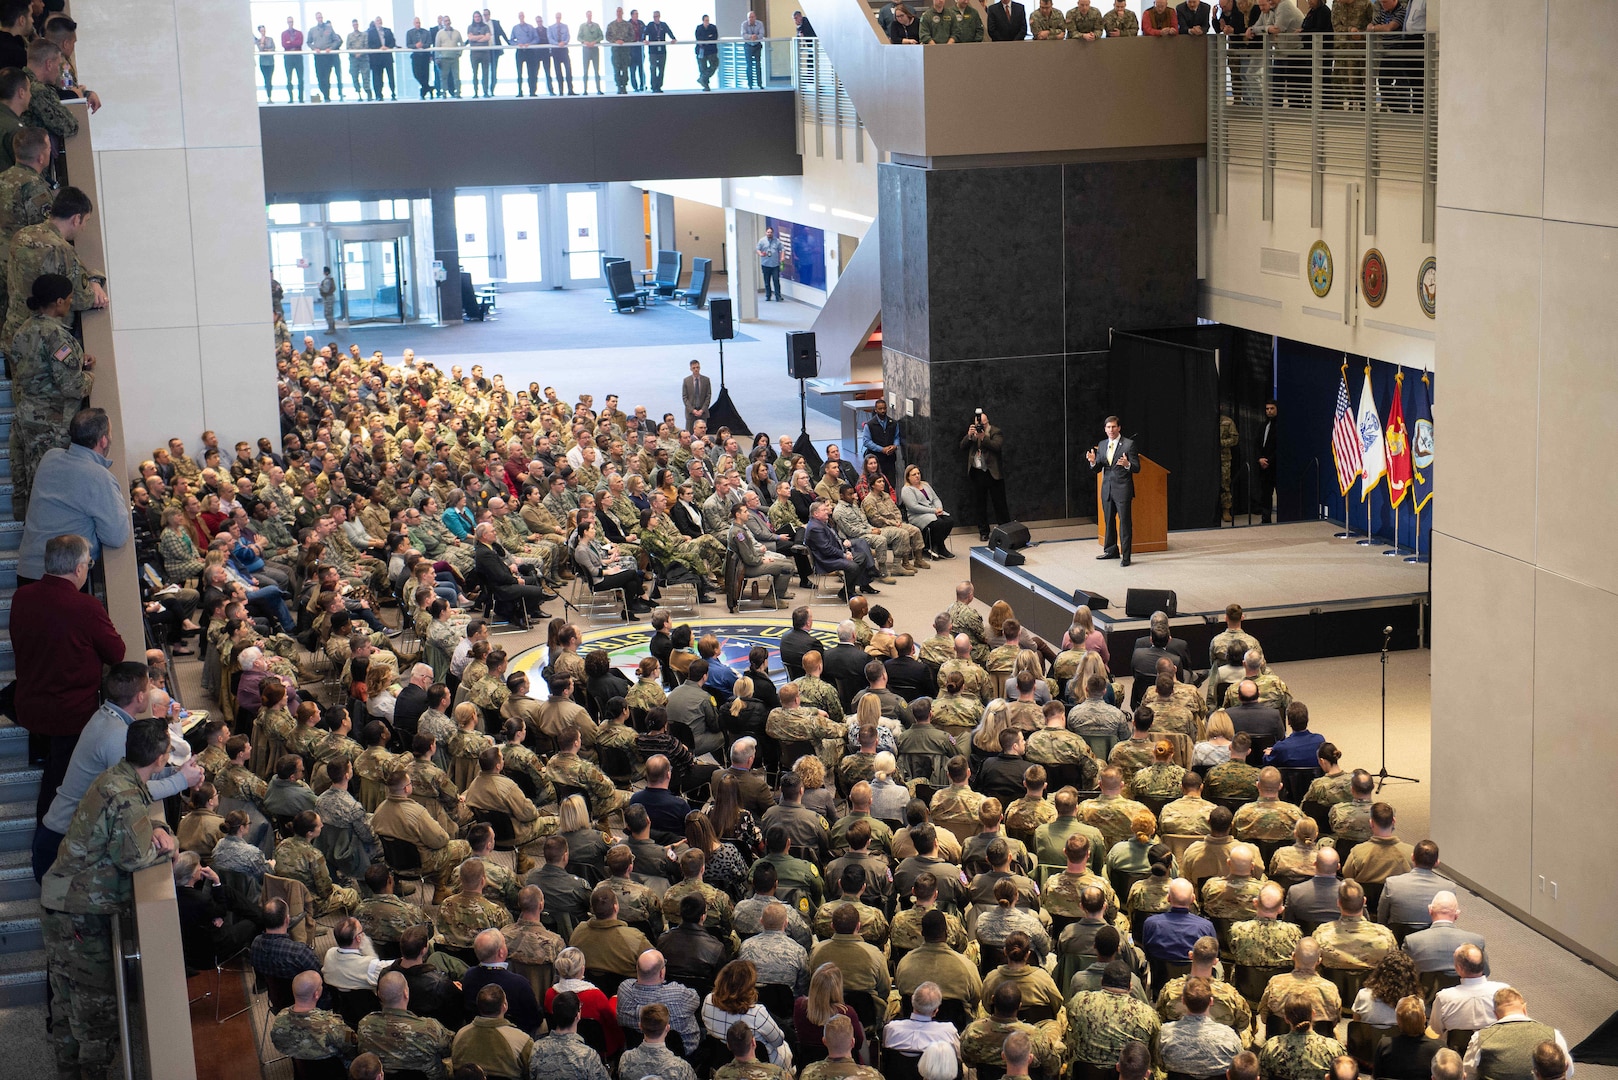 Secretary of Defense Dr. Mark T. Esper speaks to soldiers, sailors, airmen, Marines, civilians and spouses assigned to Offutt Air Force Base, Neb., during a town hall meeting at the U.S. Strategic Command (USSTRATCOM) Command and Control Facility, Feb. 20, 2020. During the event, Secretary Esper thanked USSTRATCOM, 55th Wing, tenant units, and their families for their service, and took their questions about a variety of topics on their minds, from the mission to supporting their families.